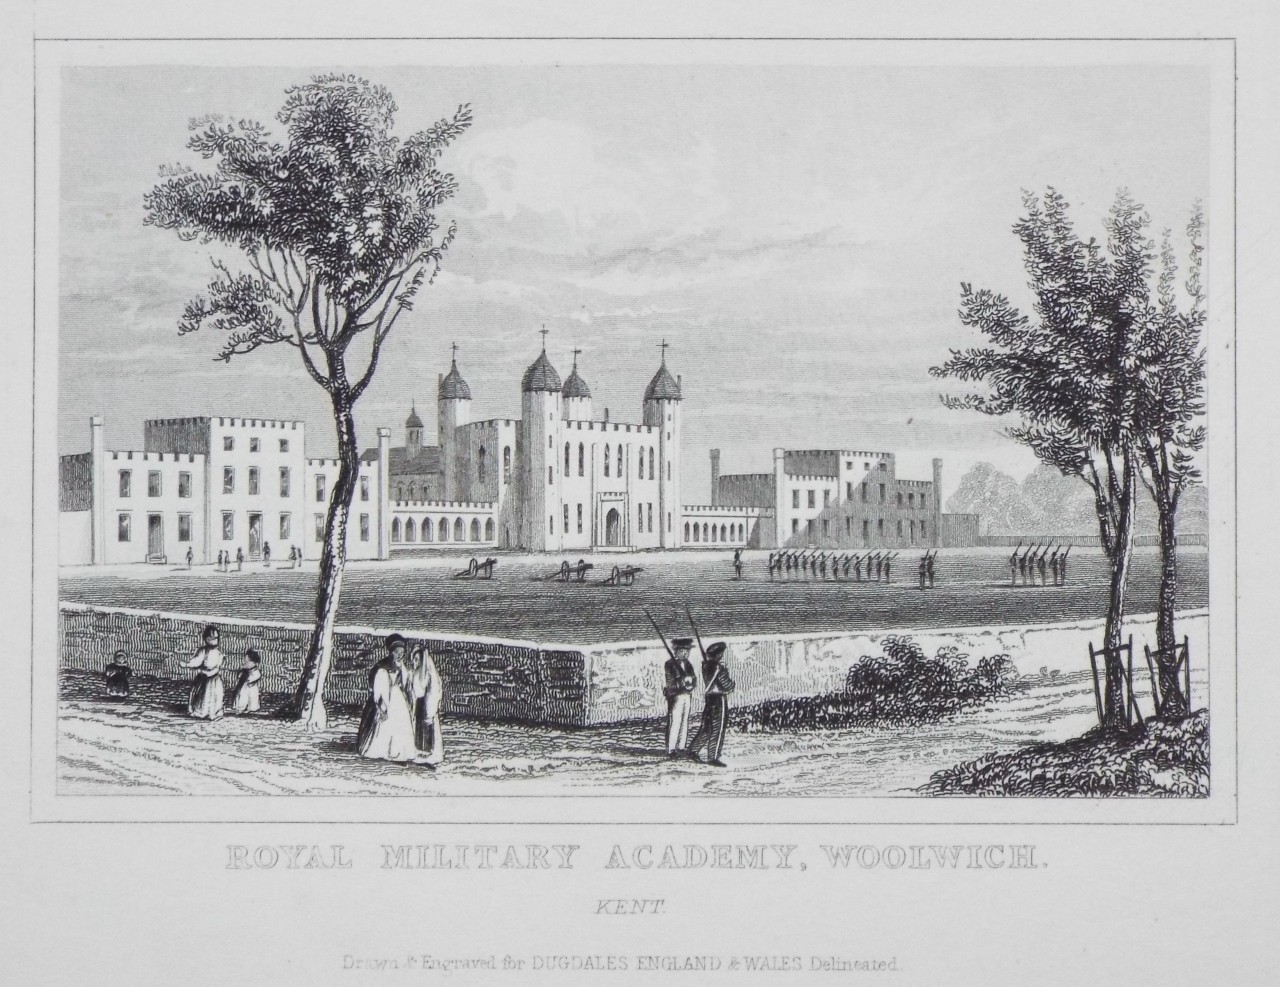 Print - Royal Military Academy, Woolwich. Kent.